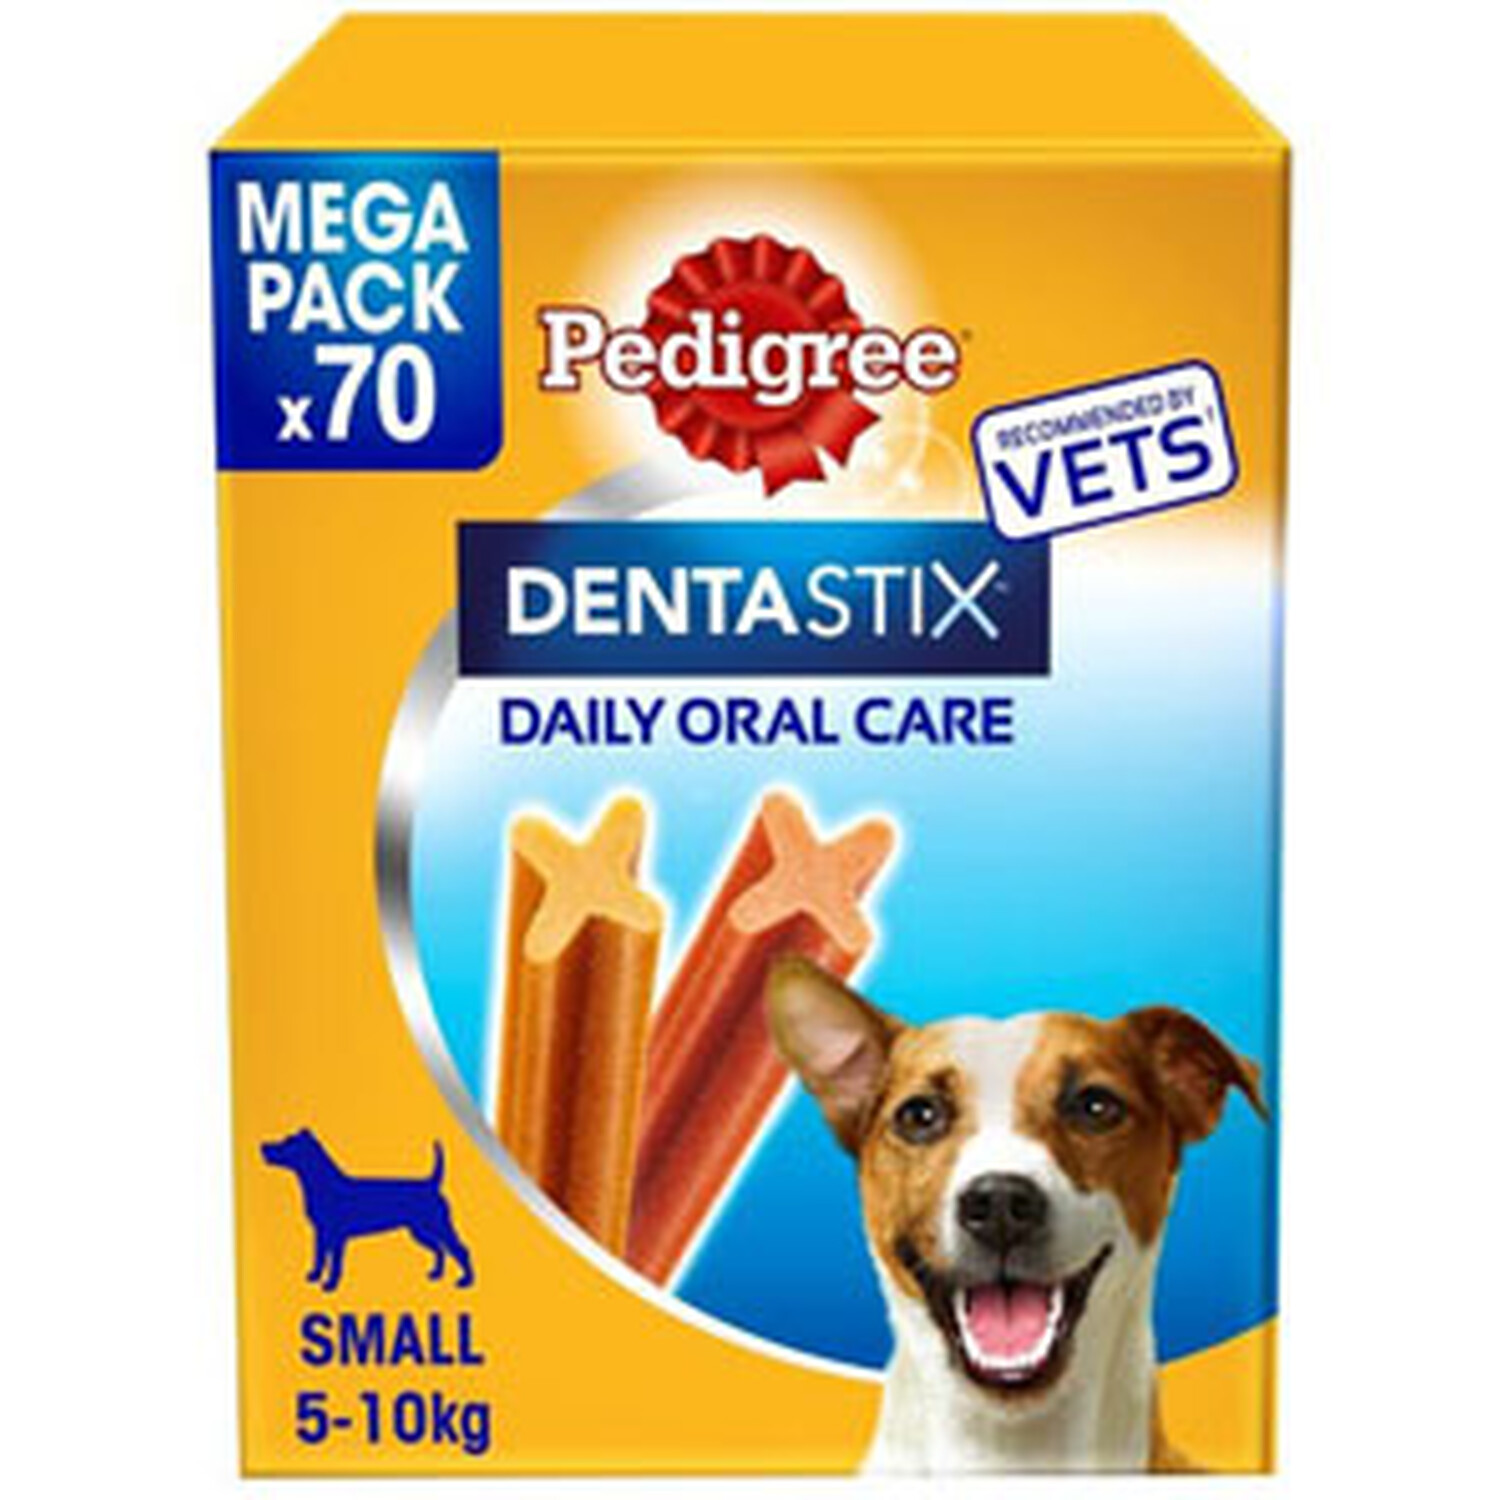 Pedigree Dentastix Daily Oral Care for Small Dogs - 70 Image 1